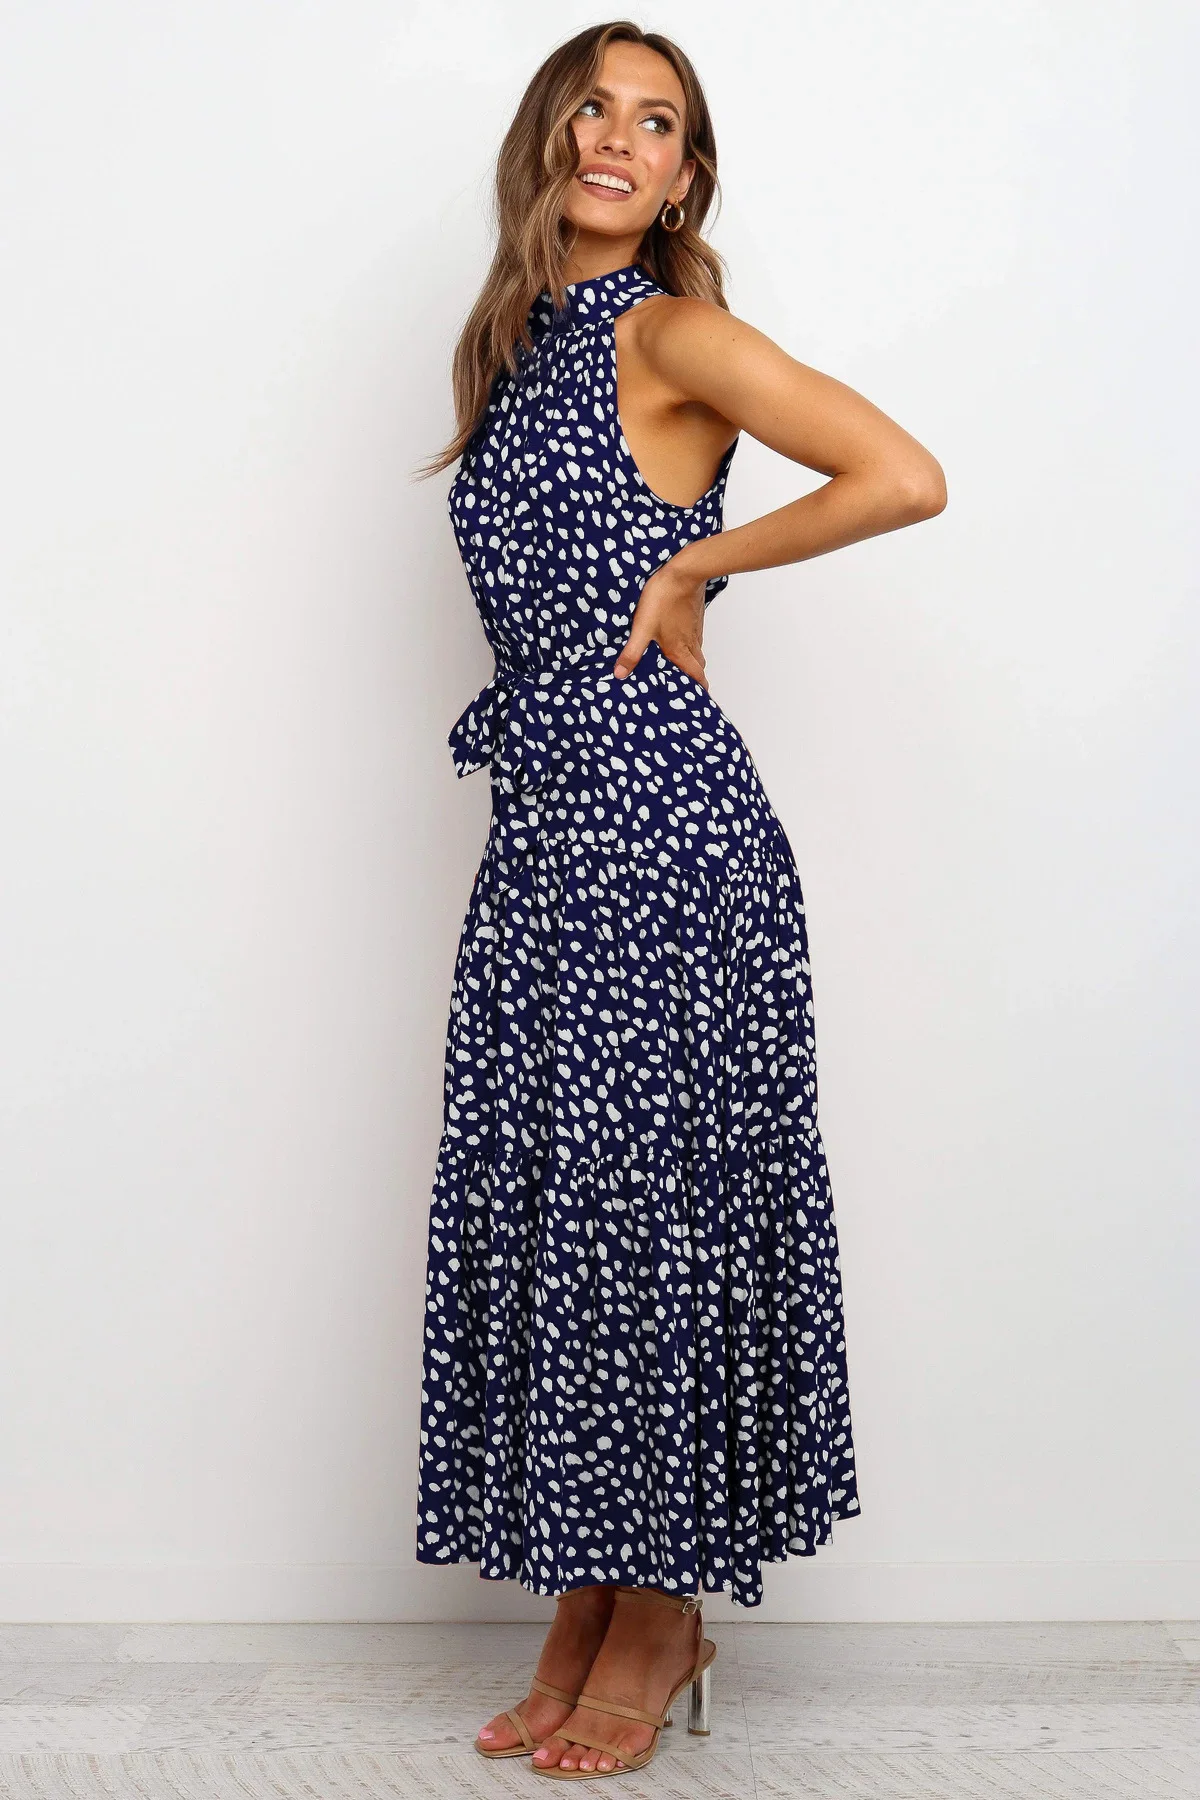 Summer Long Dress Polka Dot Casual Dresses Black Sexy Halter Strapless New 2021 Yellow Sundress Vacation Clothes For Women